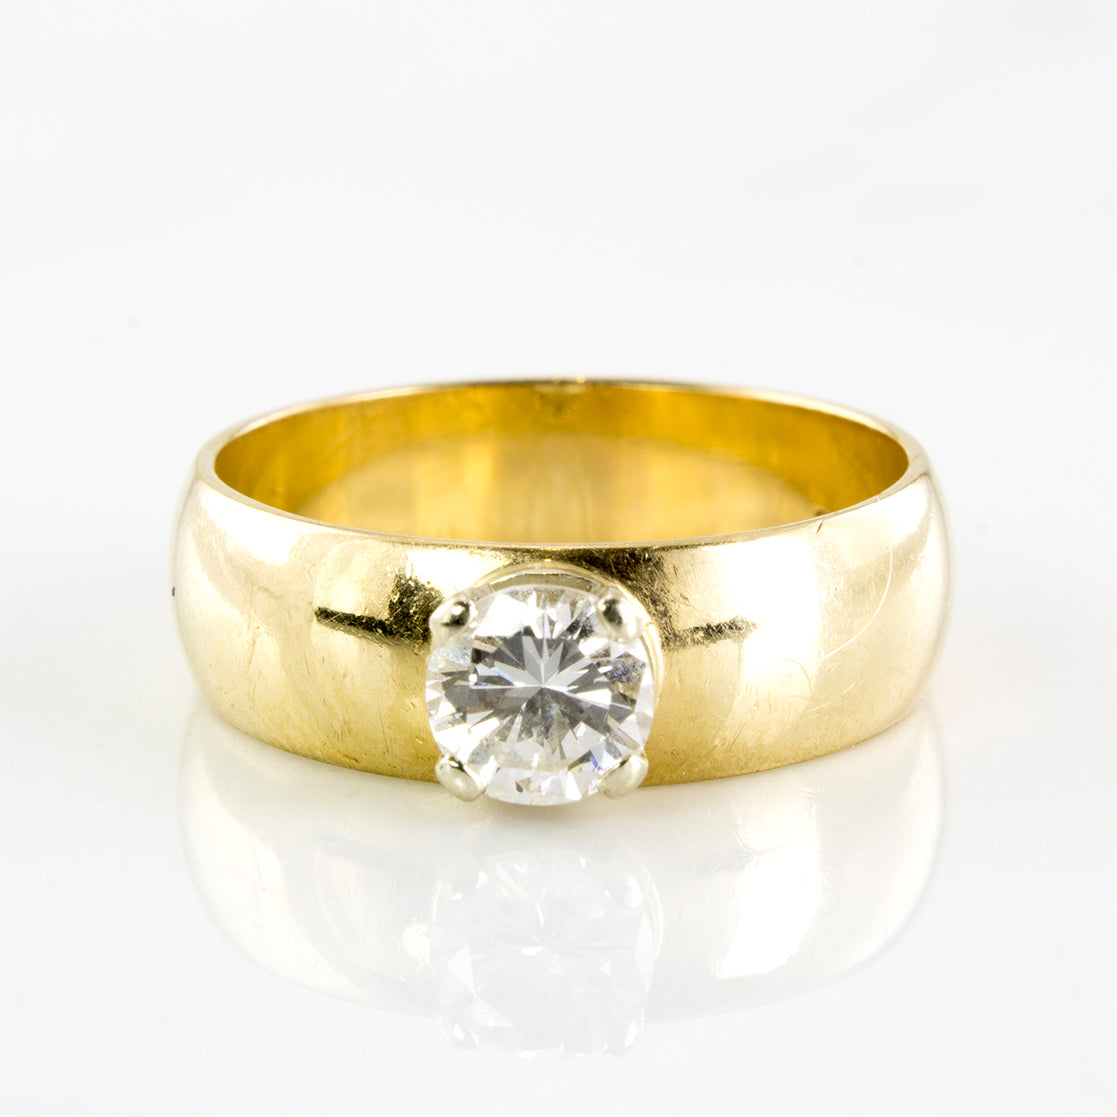 Wide Band Solitaire Diamond Ring | 0.46 ctw | SZ 5.75 |